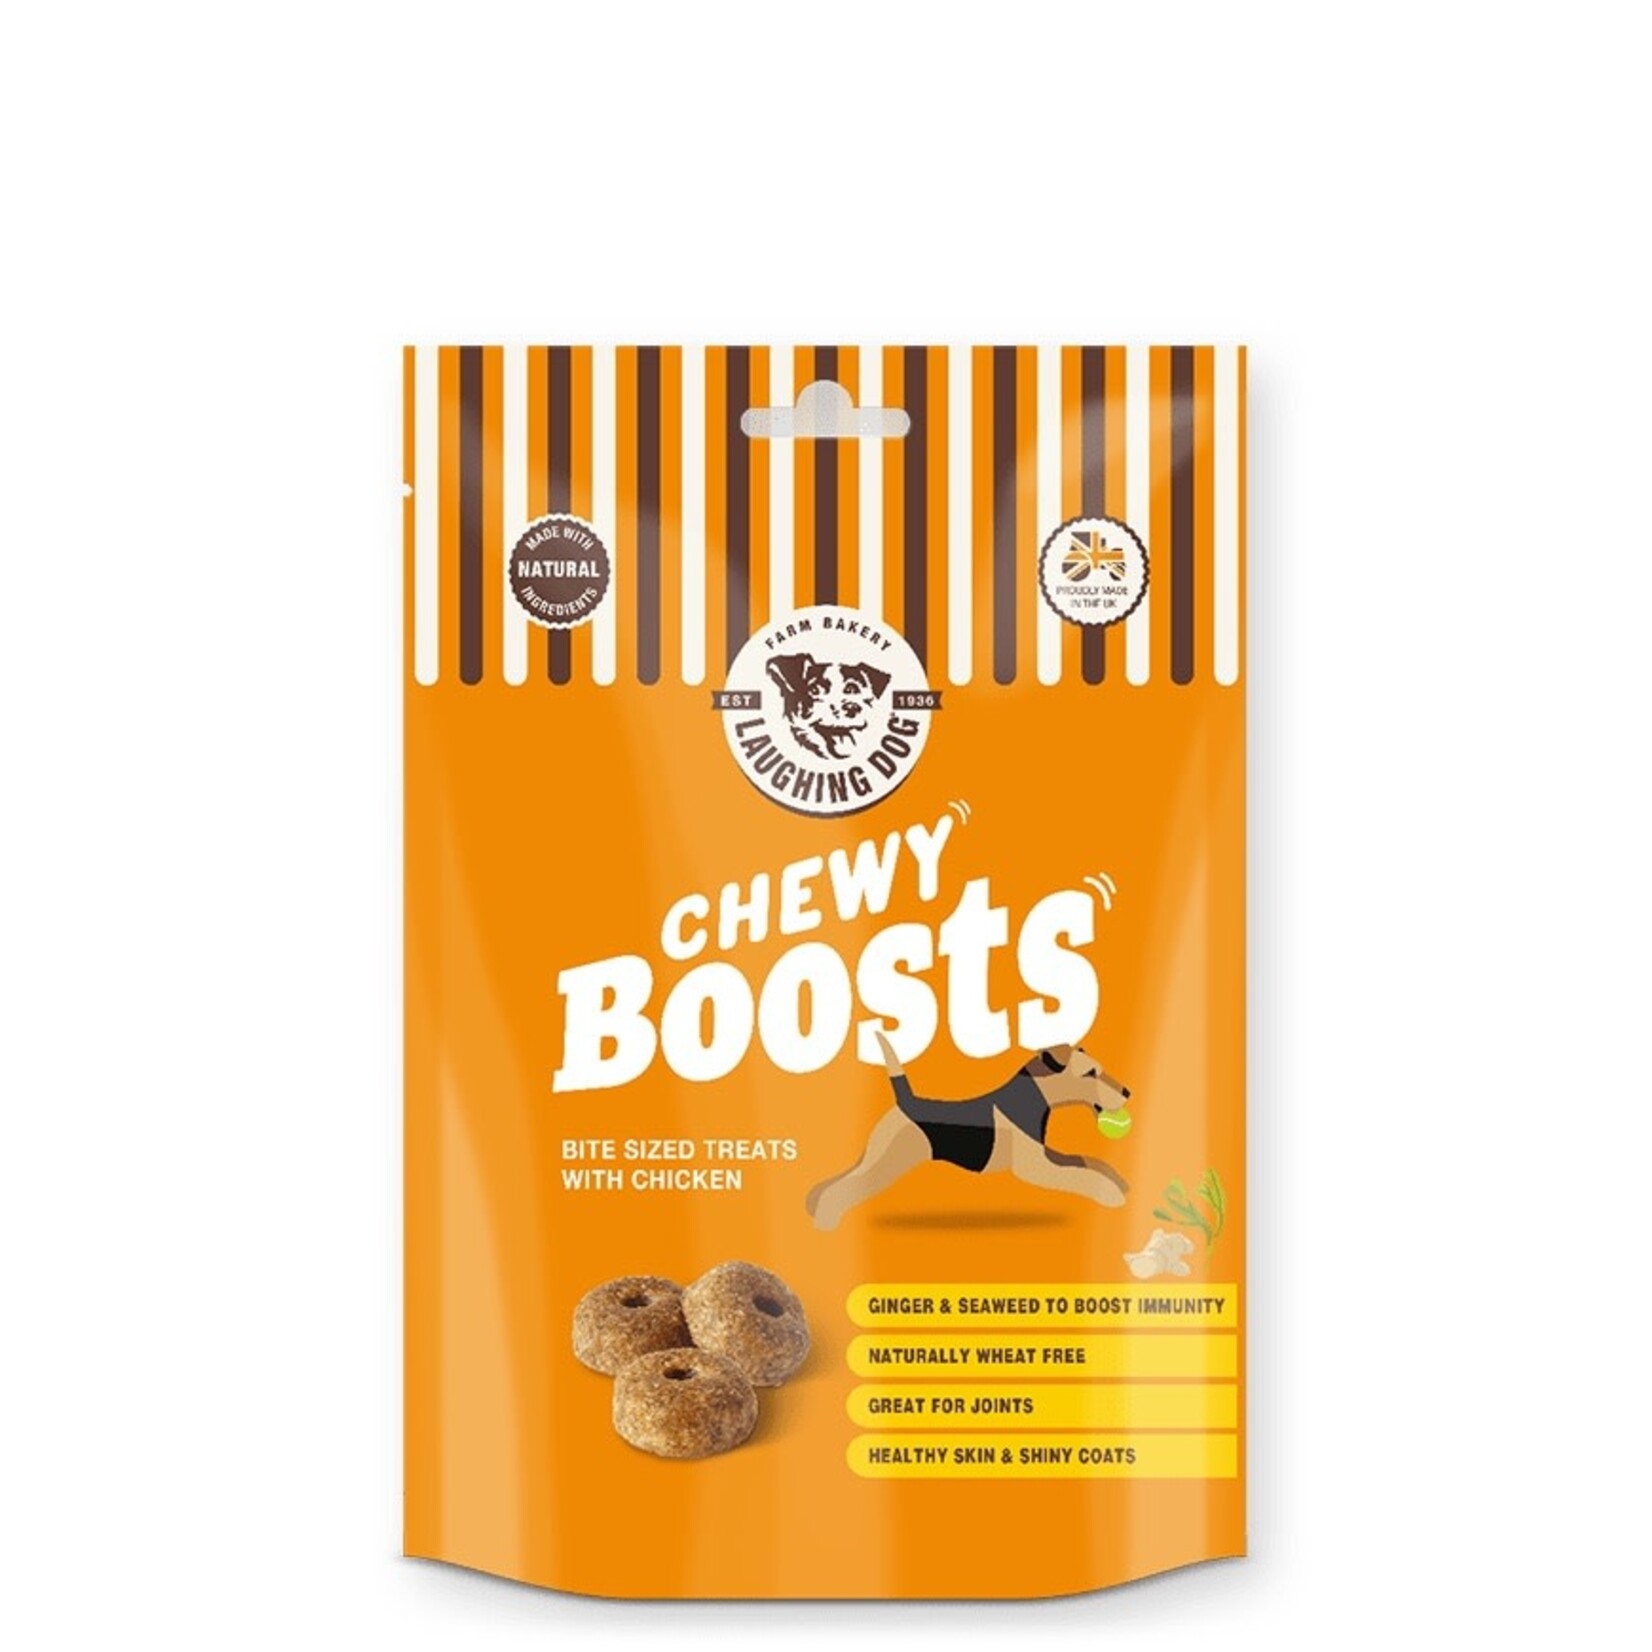 Laughing Dog Wheat Free Chewy Boosts Bite-sized Dog Treats with Chicken, 125g